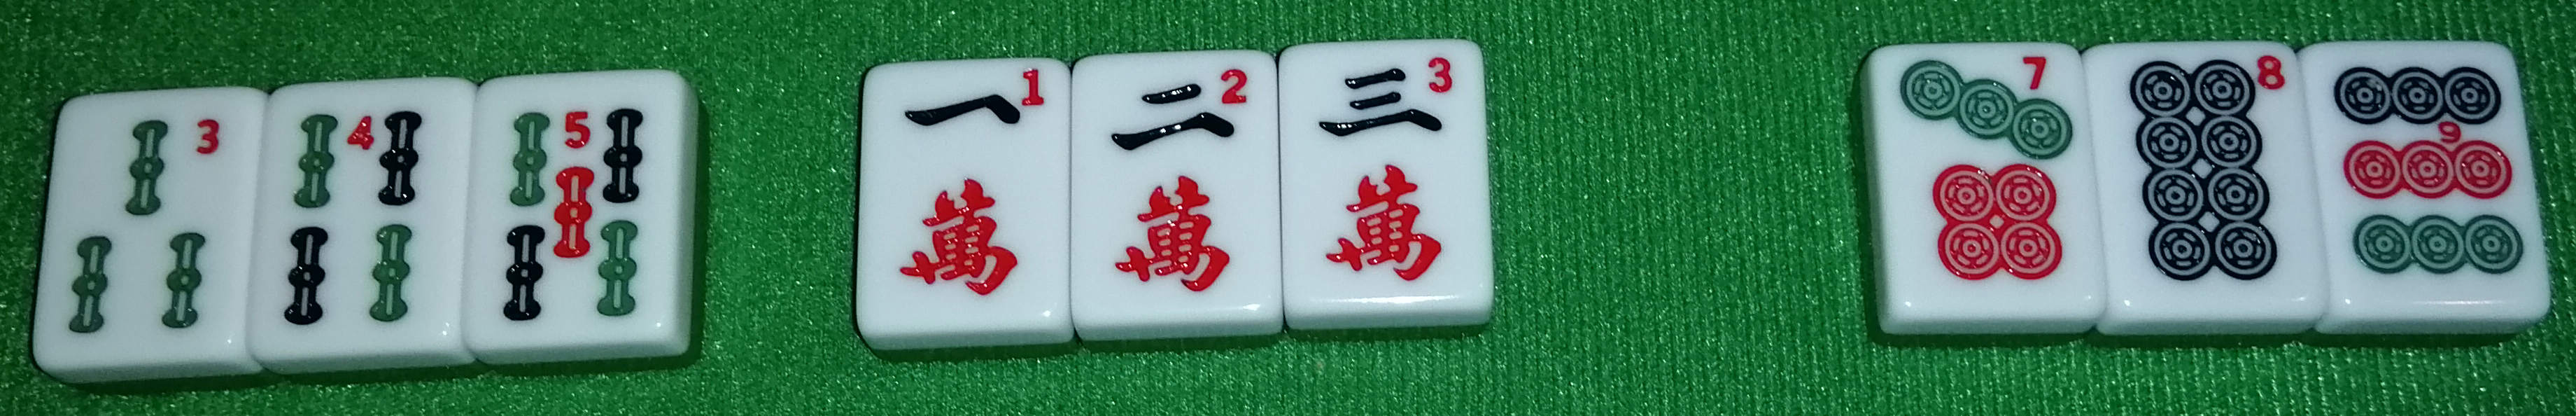 Three different straight melds, from left to right: A 3-4-5 Sou, a 1-2-3 Wan, and a 7-8-9 Pin.